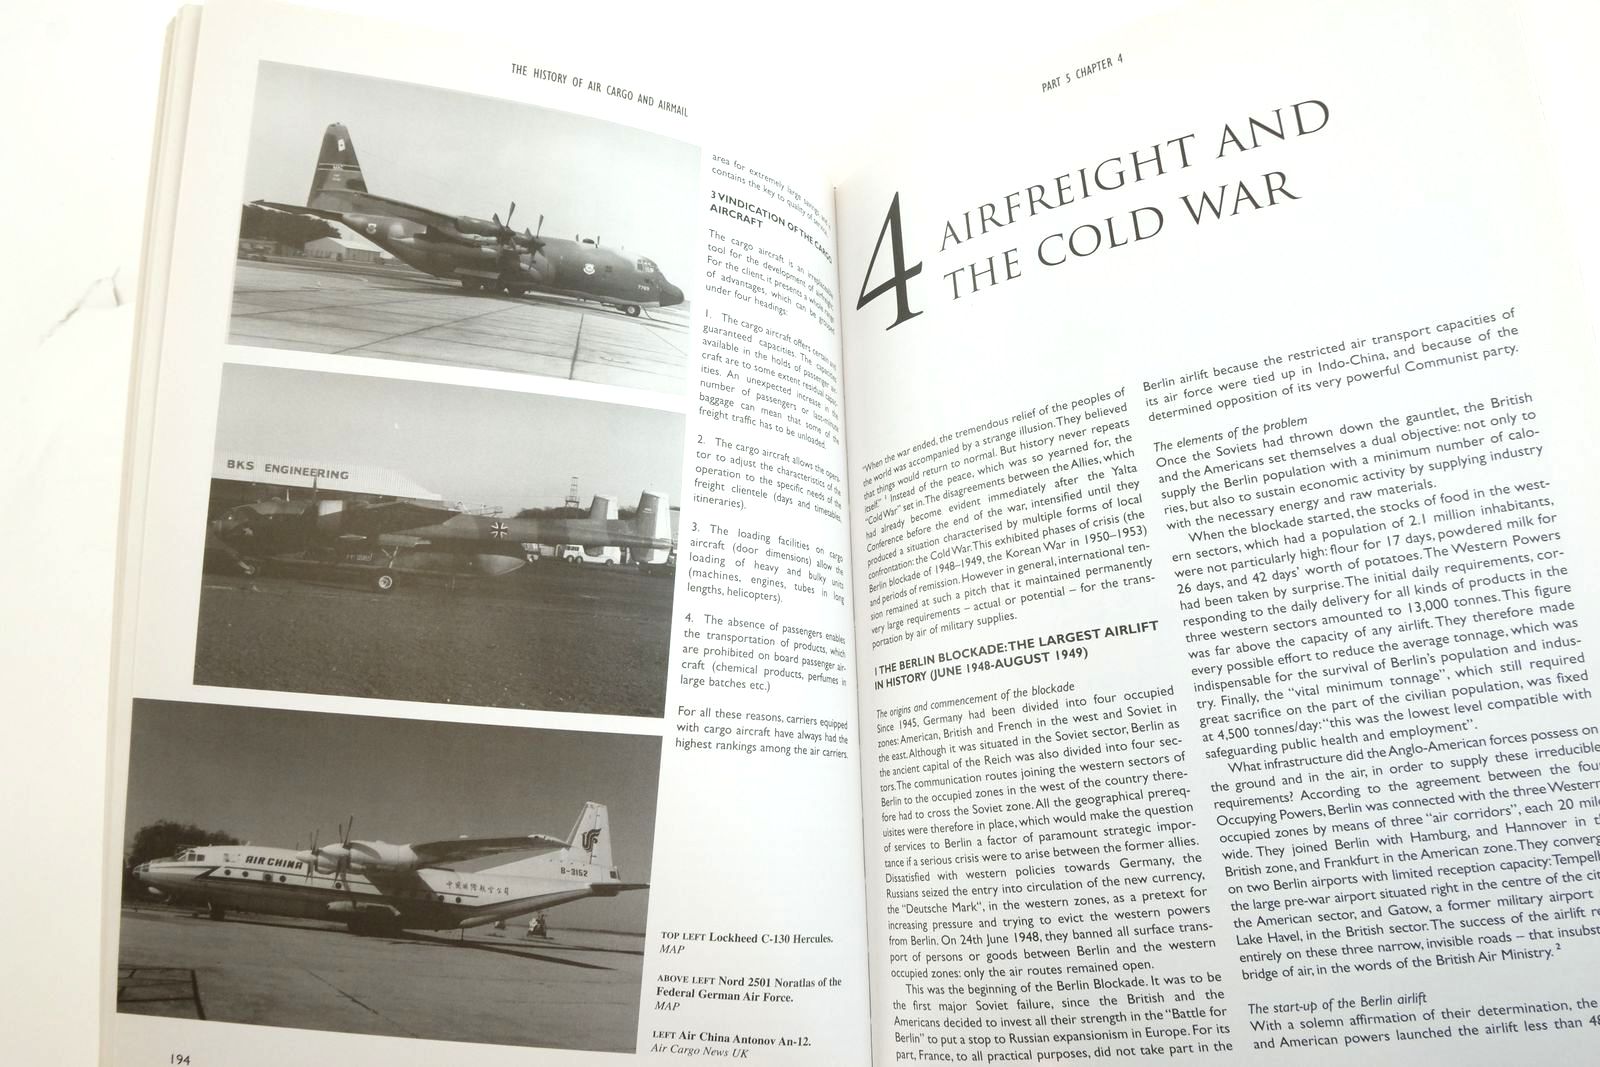 Photo of THE HISTORY OF AIR CARGO AND AIRMAIL FROM THE 18TH CENTURY written by Allaz, Camille published by Christopher Foyle Publishing (STOCK CODE: 2136495)  for sale by Stella & Rose's Books